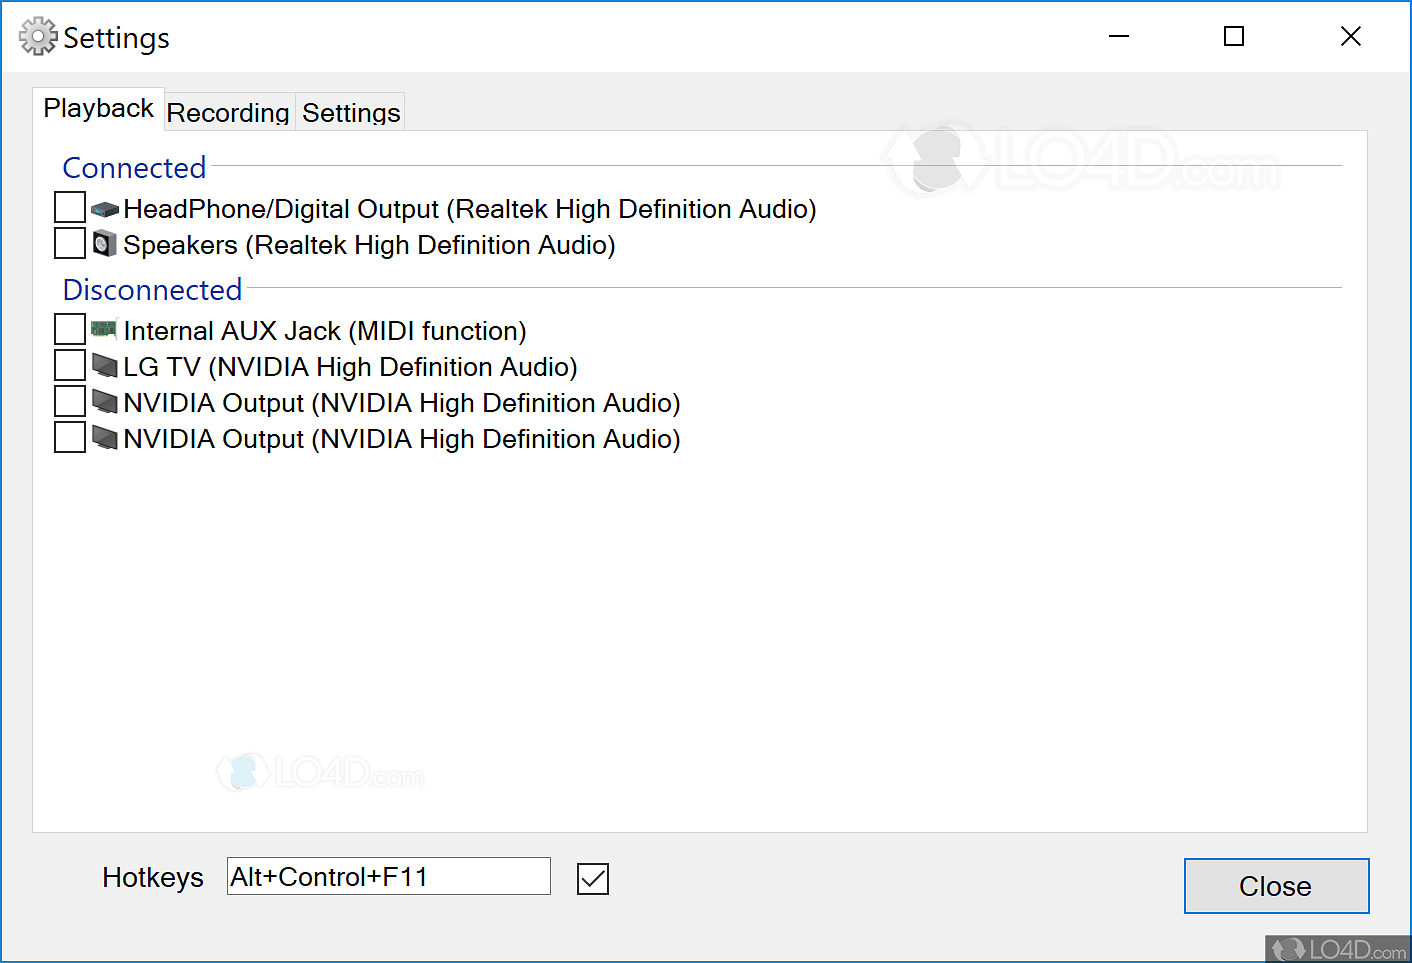 download soundswitch 6